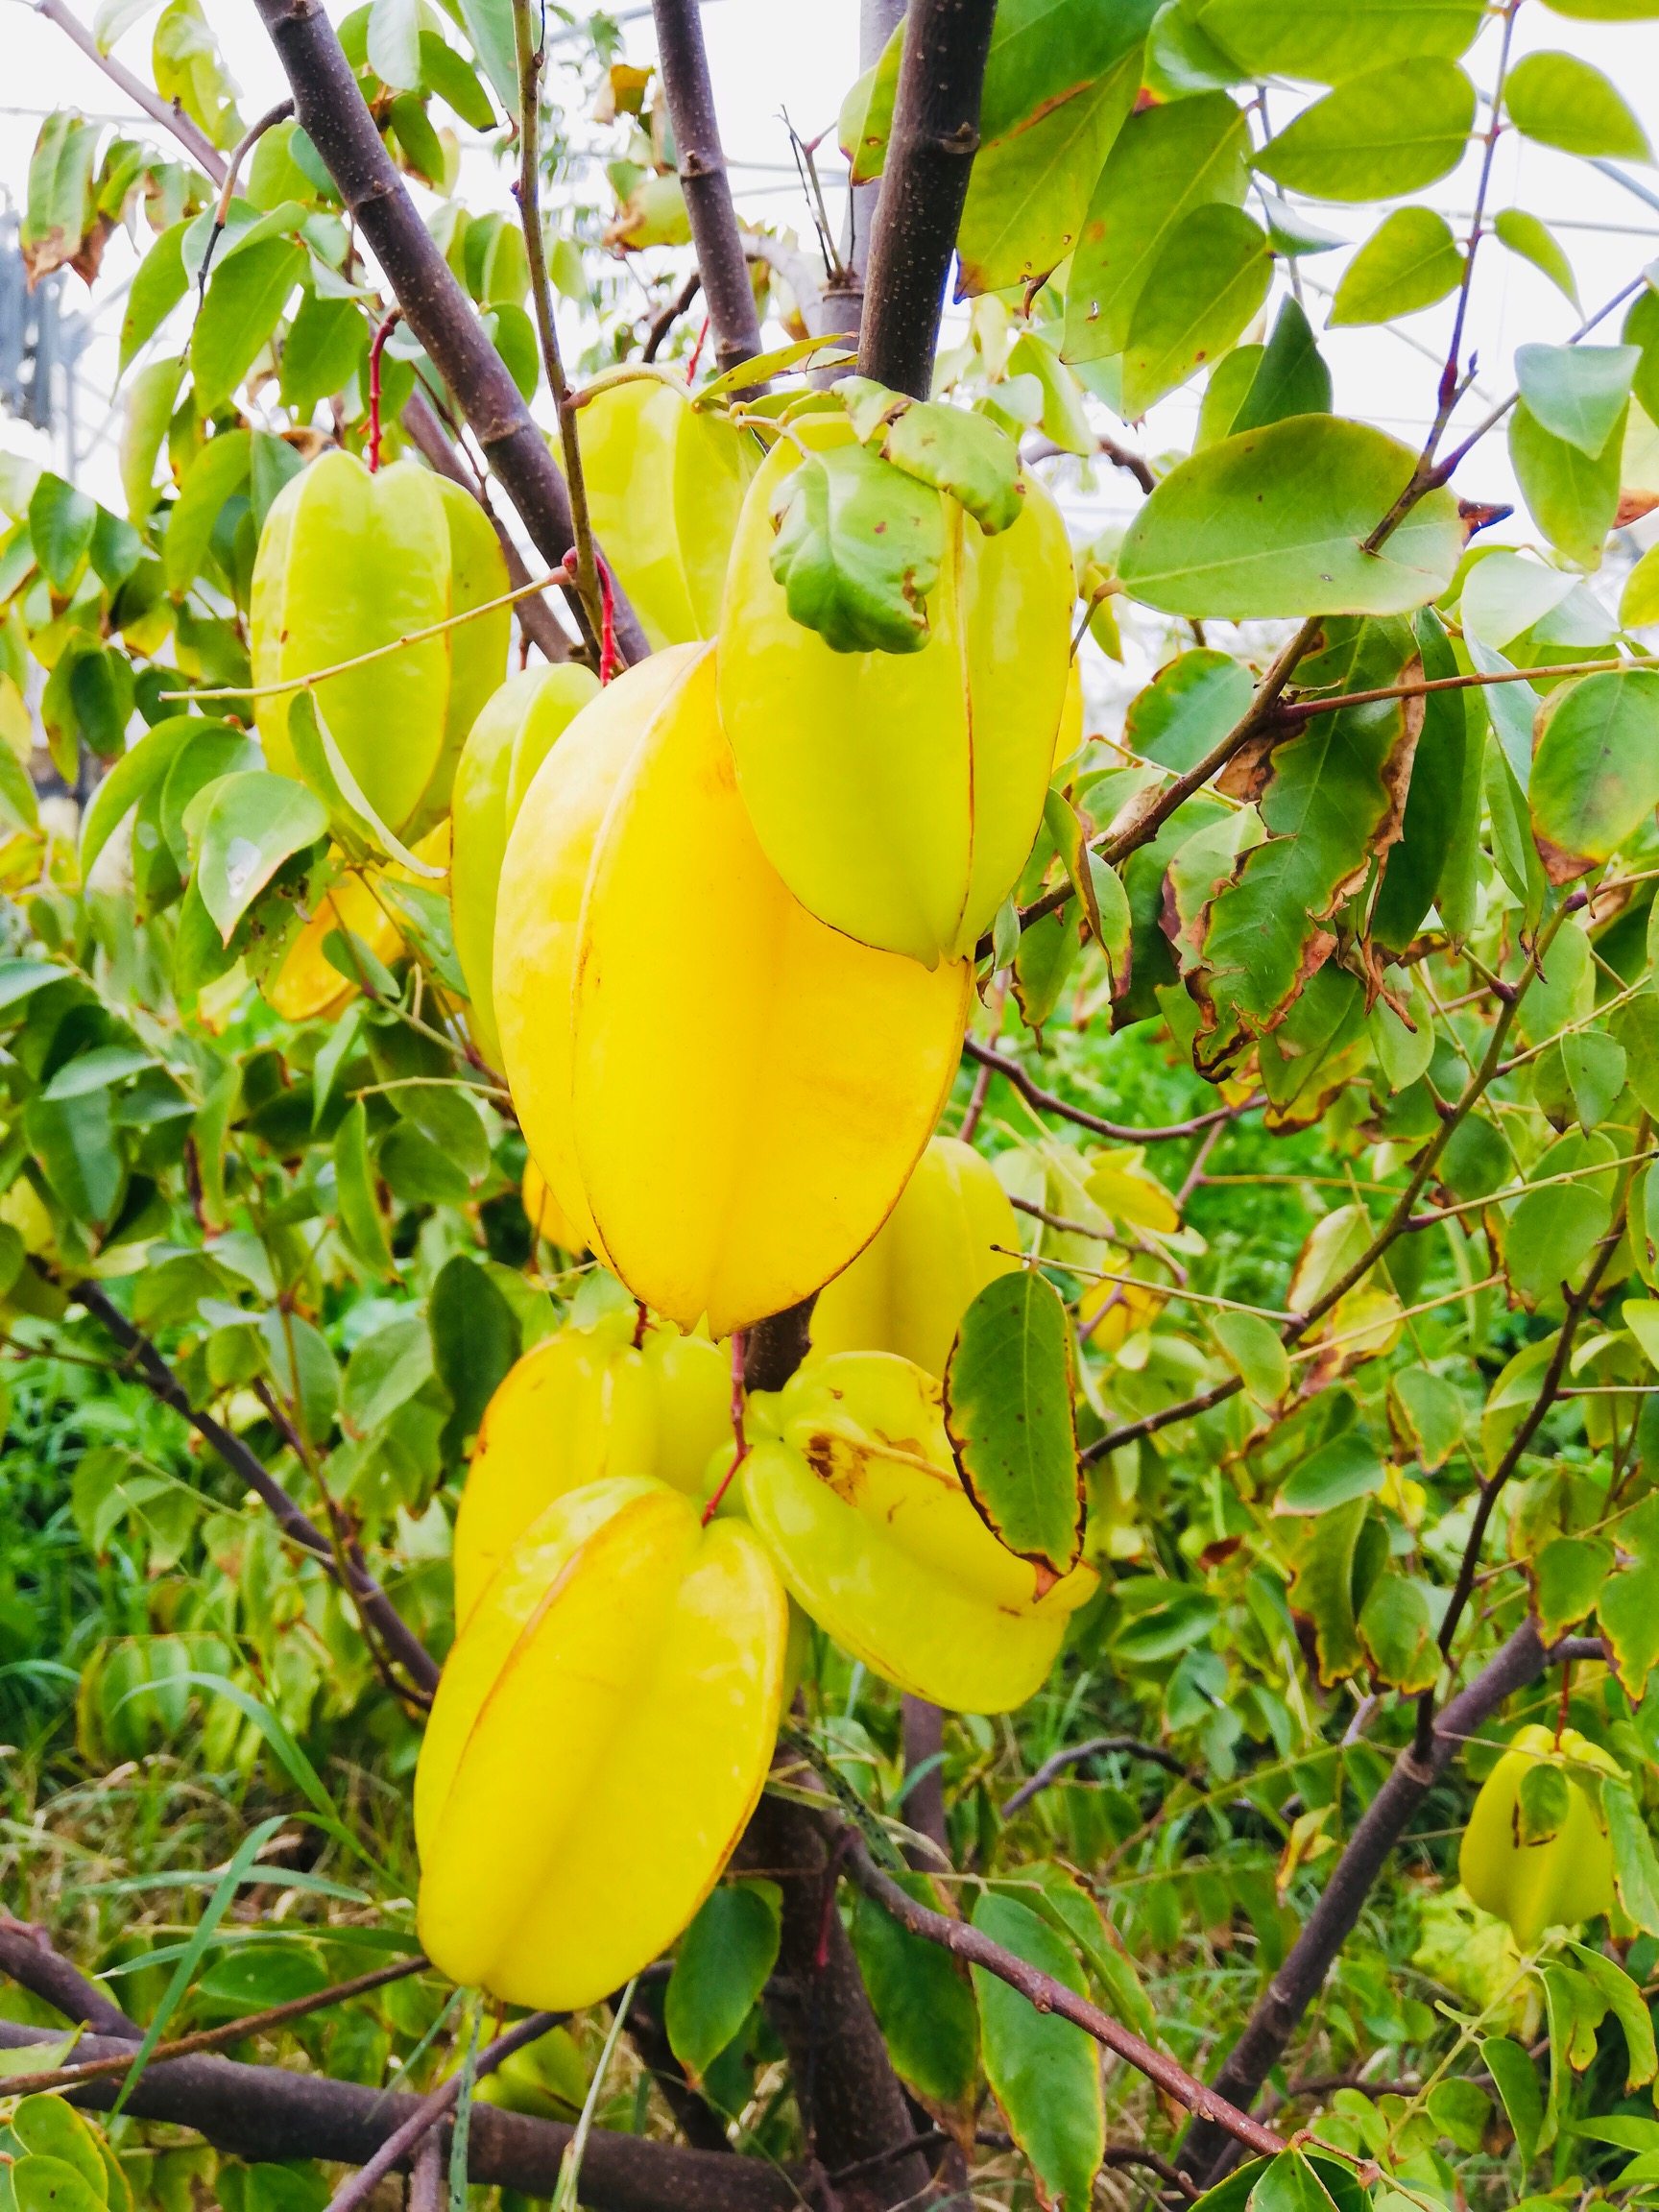 An increasing amount of European farmland is being dedicated to the growth of tropical fruit – like this star fruit. Photo: Silvia Marchetti